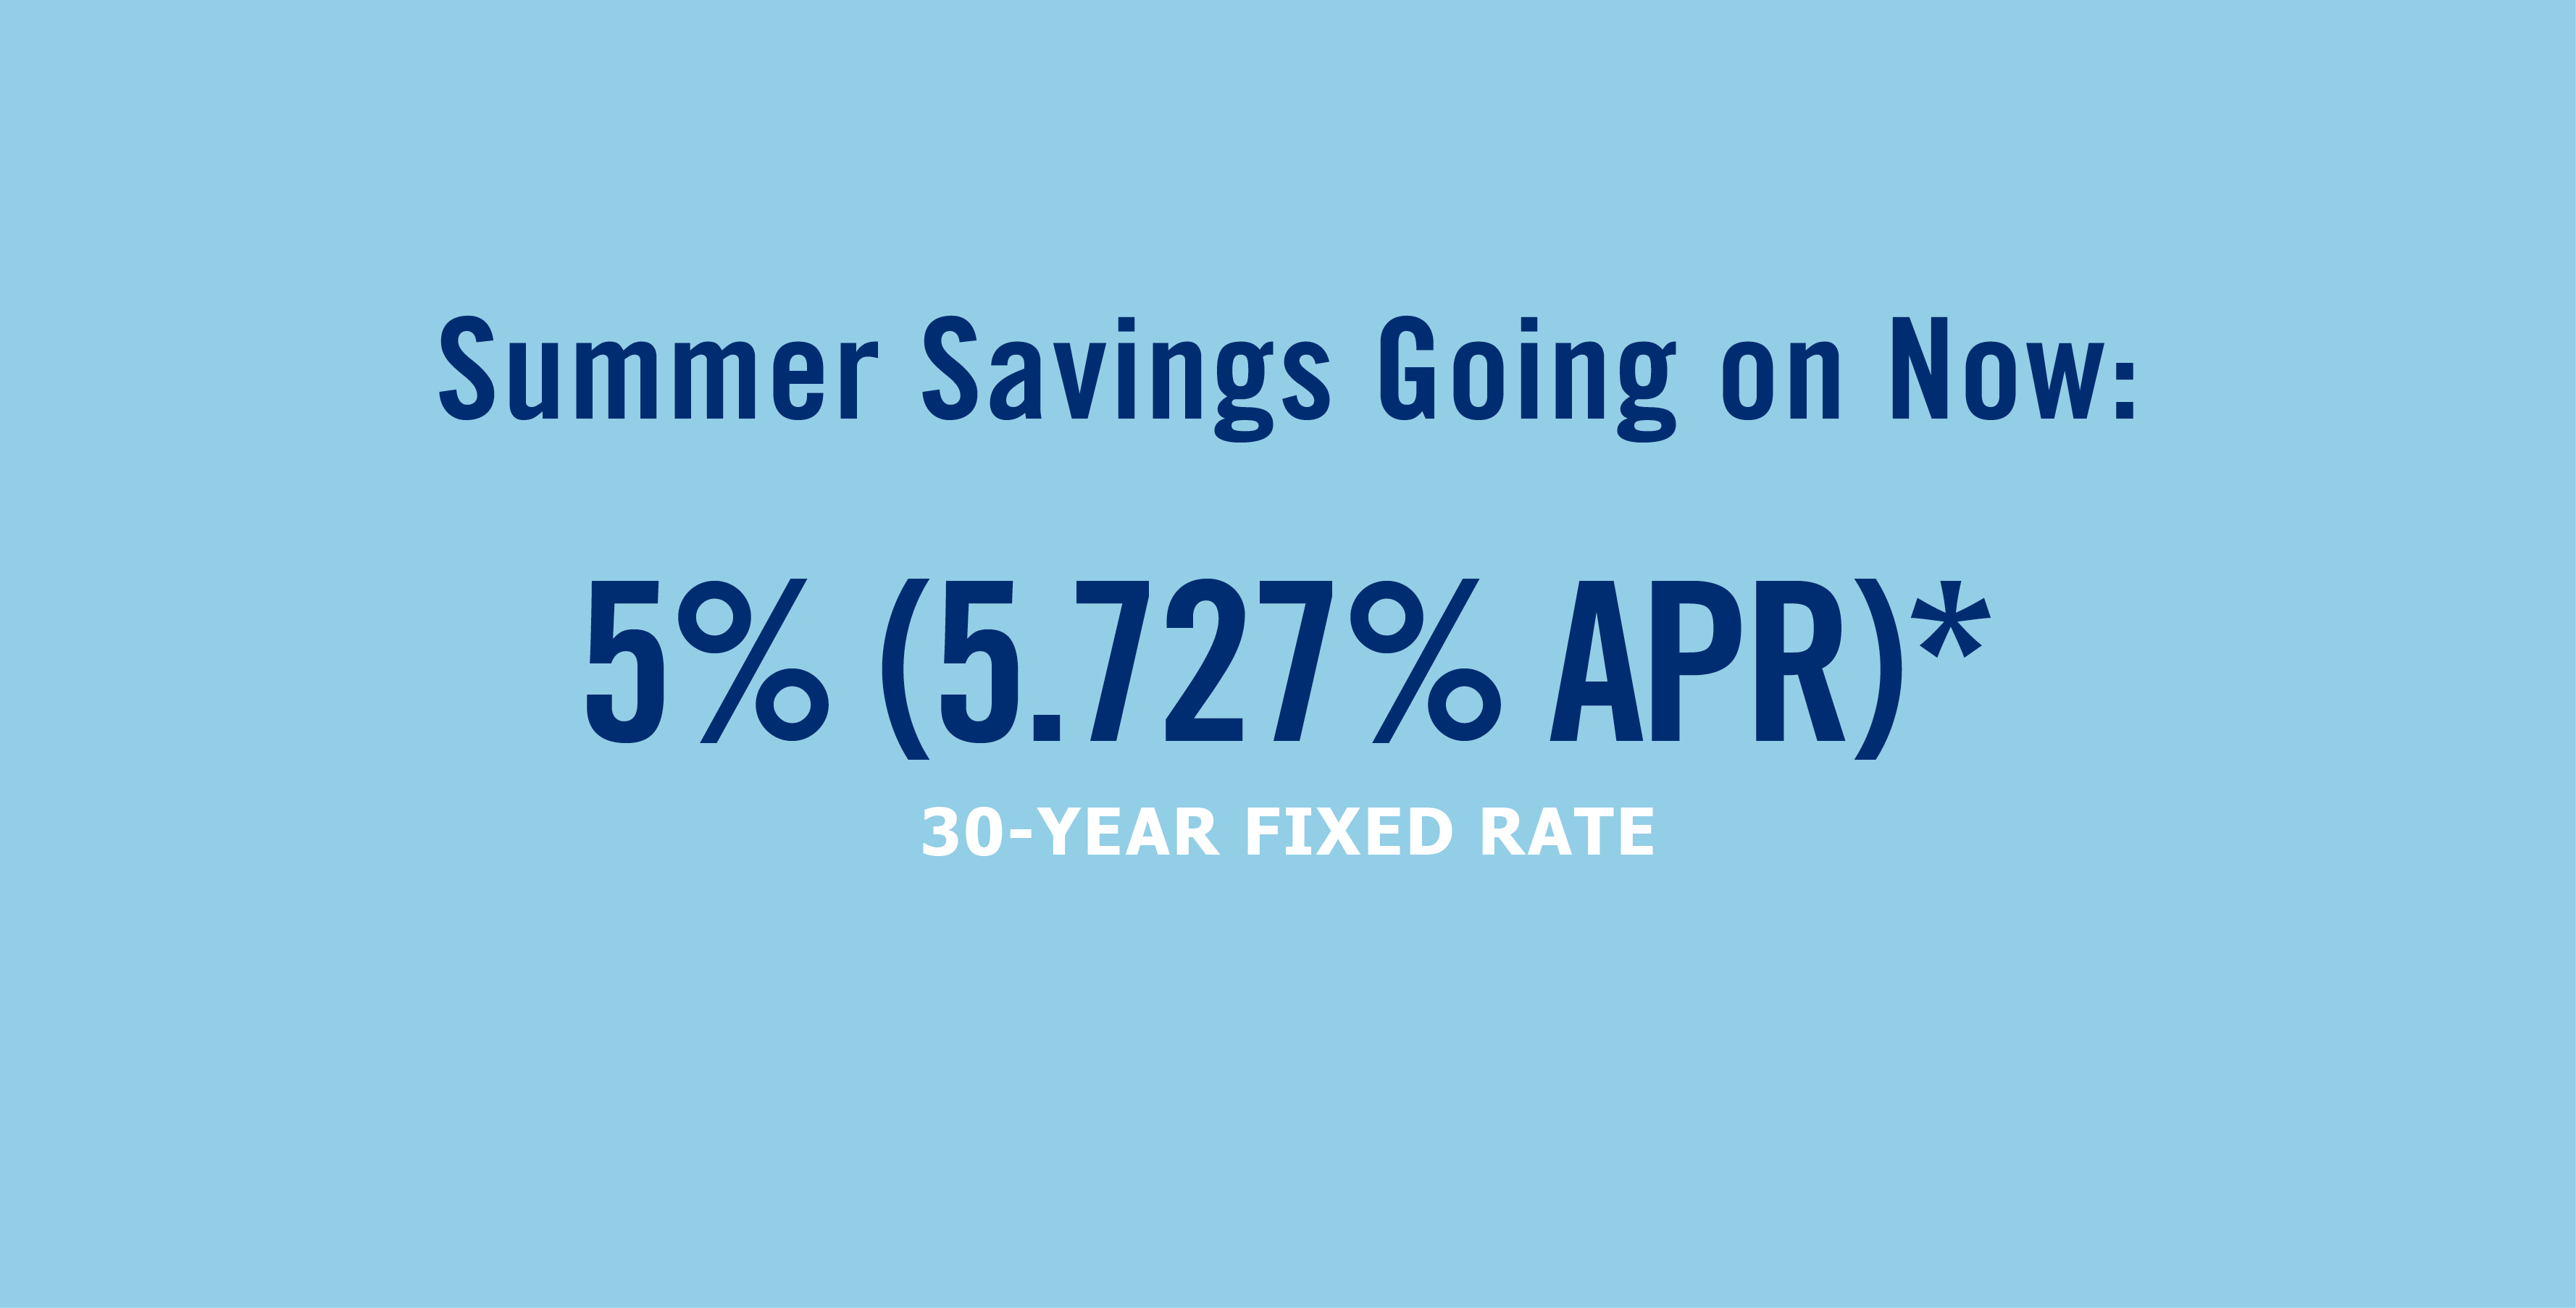 Summer Savings going on now: 5% (5.727% APR)* at a 30-Year Fixed Rate